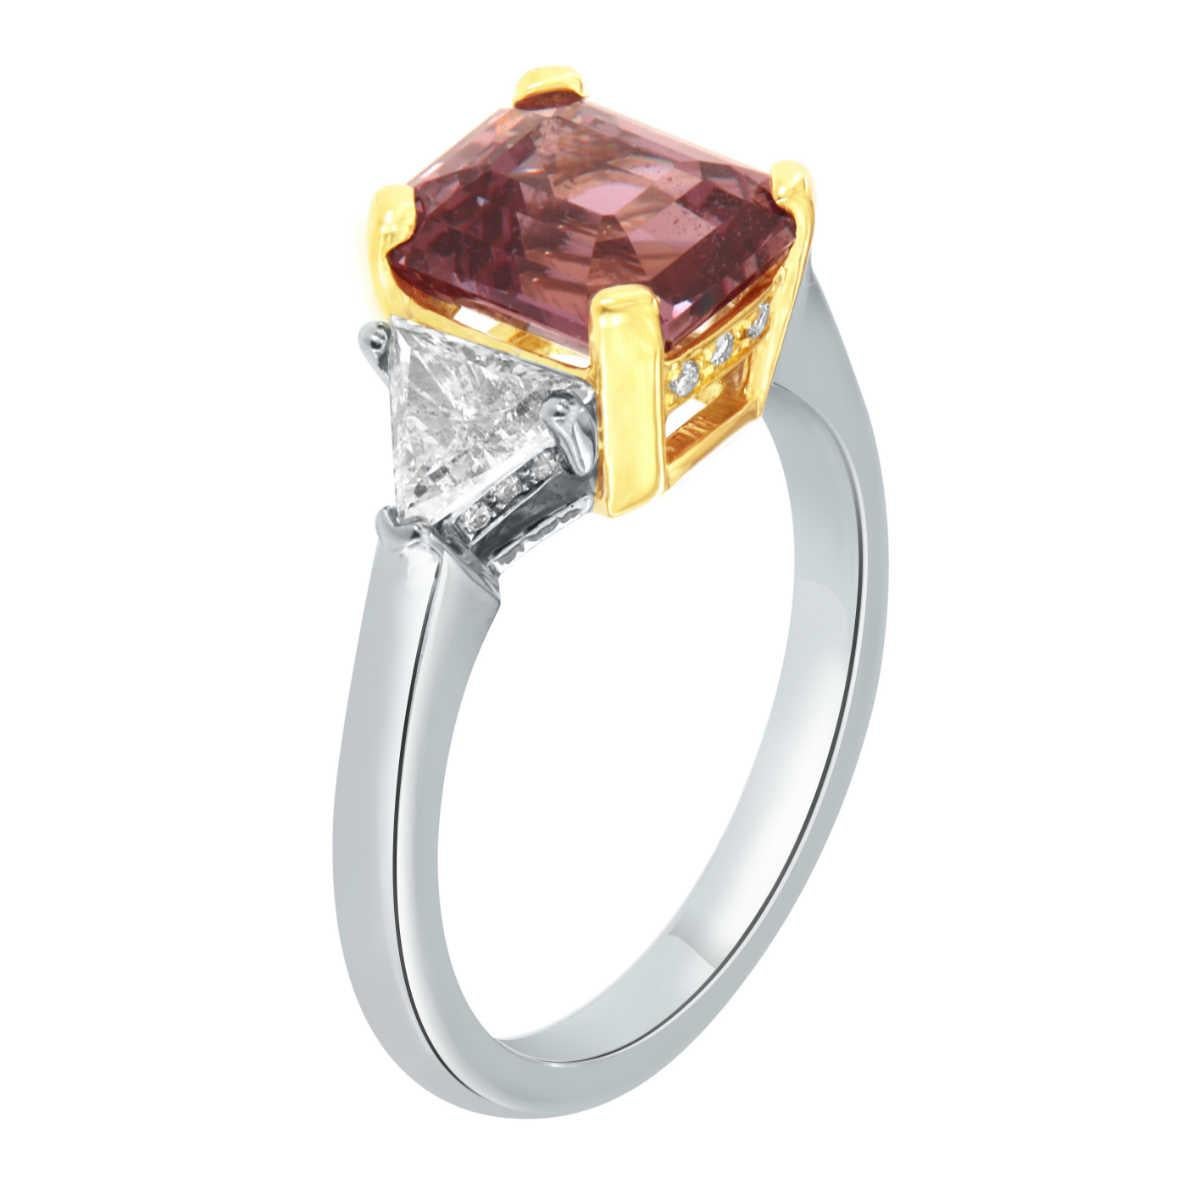 This magnificent three-stones 18k & 14K Two-Tone gold ring features three gems. The center is a 3.21-carat Emerald cut Natural Purplish- Pink Natural sapphire flanked by two Trillion cut diamonds in a total weight of 0.50 carat. A hidden row of